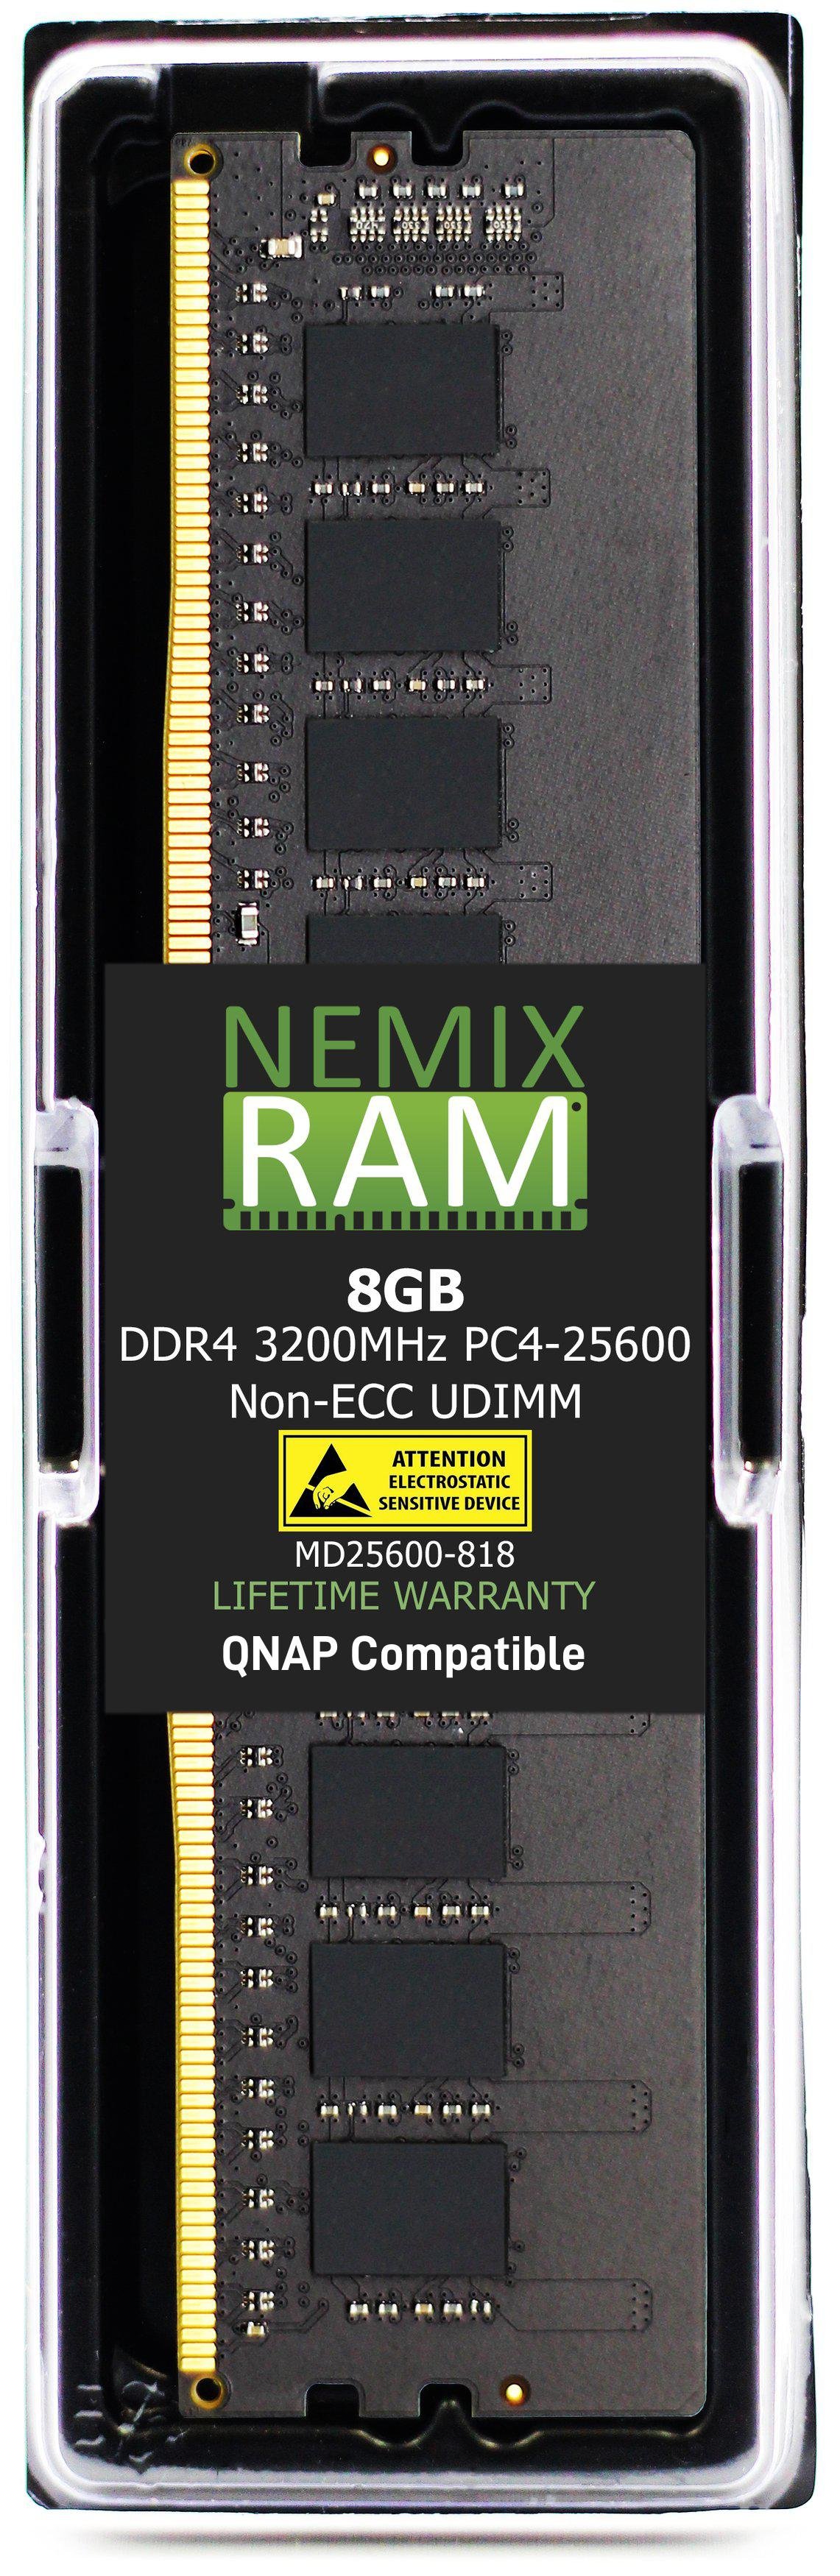 QNAP RAM-8GDR4T0-UD-3200 8GB DDR4 3200MHz PC4-25600 UDIMM 1Rx8 Compatible Memory